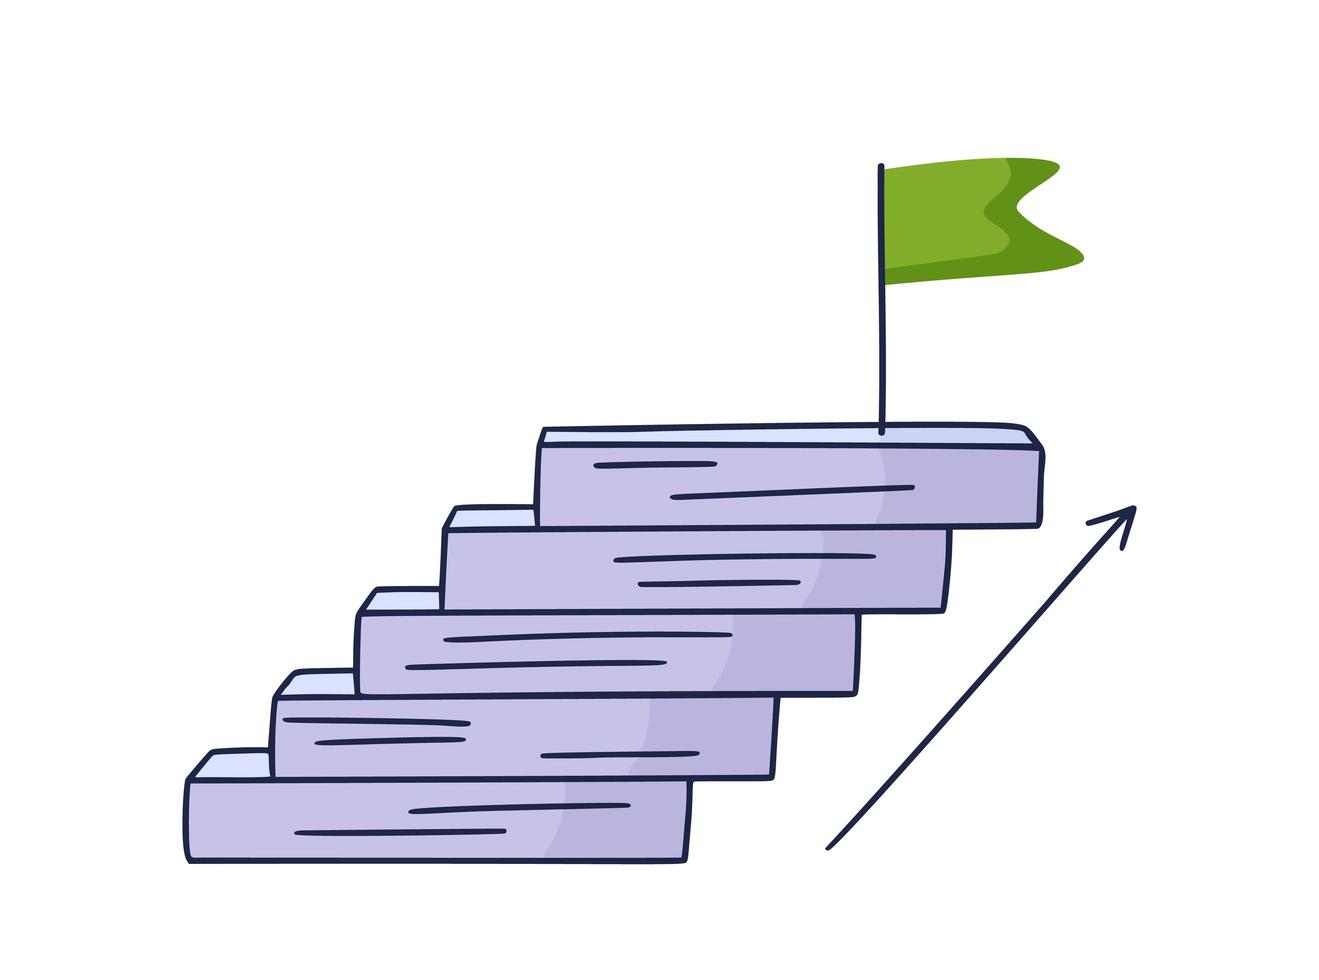 Steps up to the flag. Vector Doodle illustration drawn by hand with steps or stairs on top of which is an icon of the green flag. The path to success and achieving goals